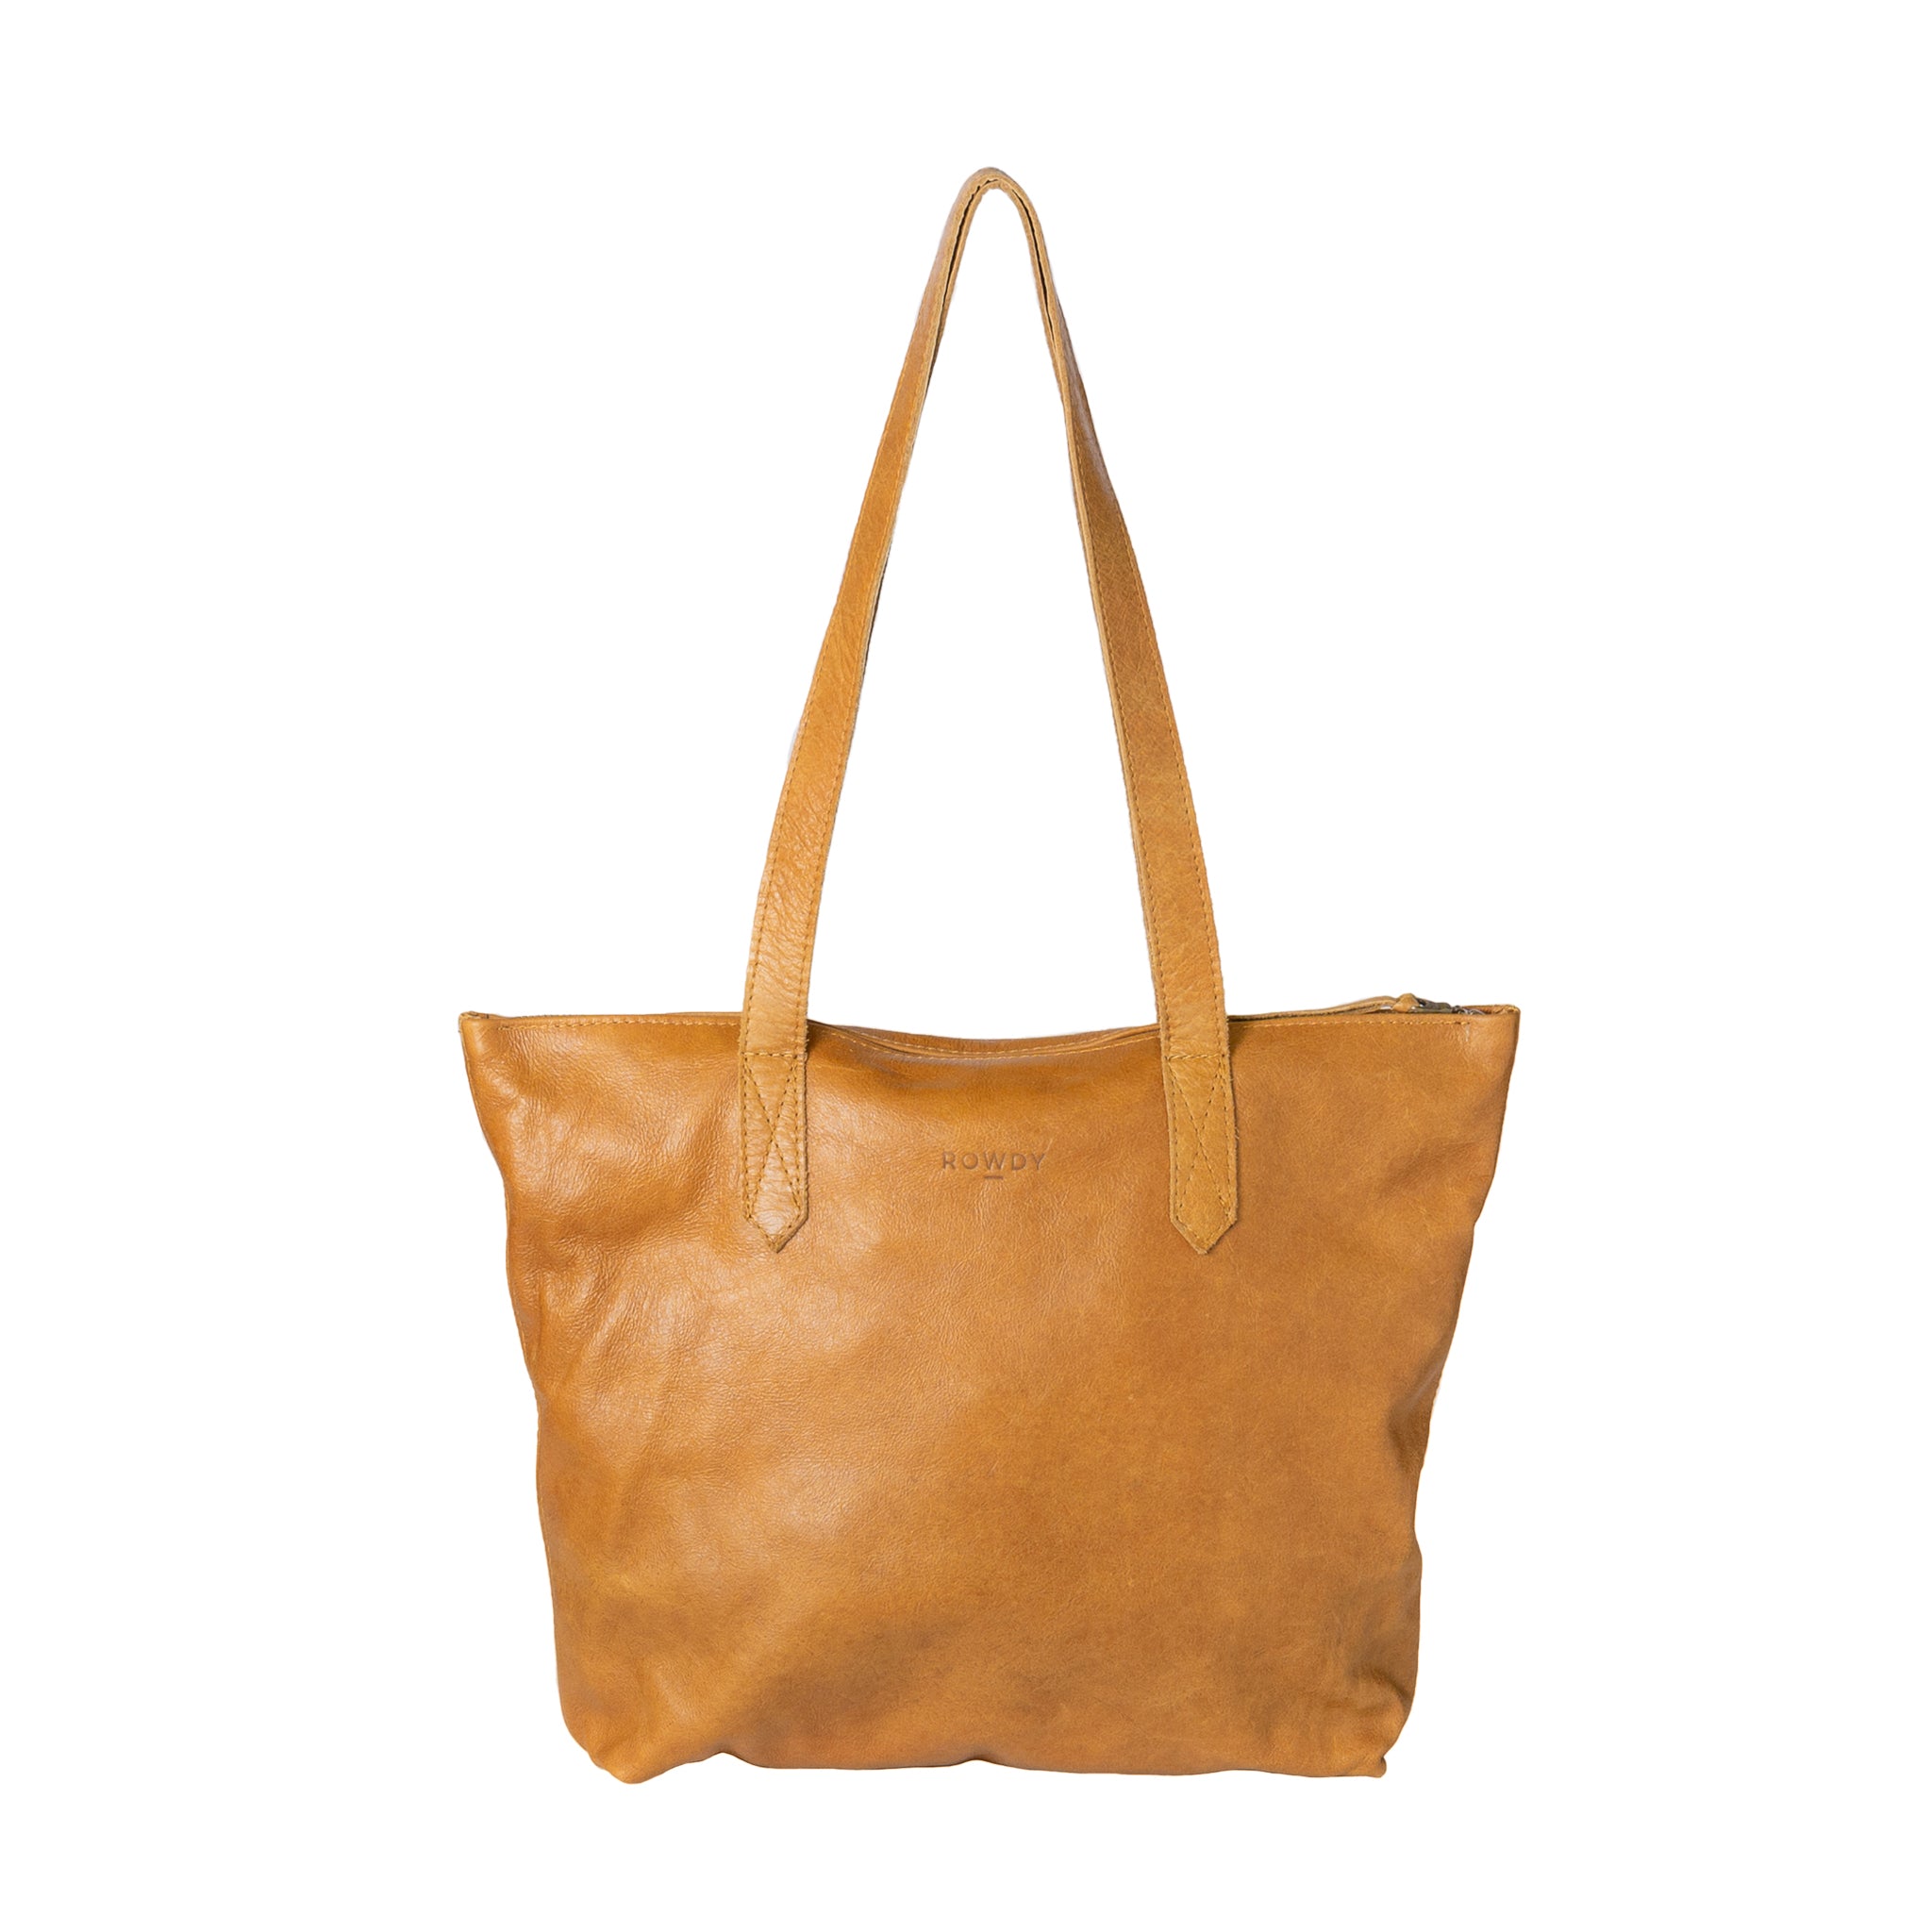 Rowdy Leather Tote Bag For Women, Russet Brown 'Maple', Soft & Natural Aniline Leather, Zipper Closure